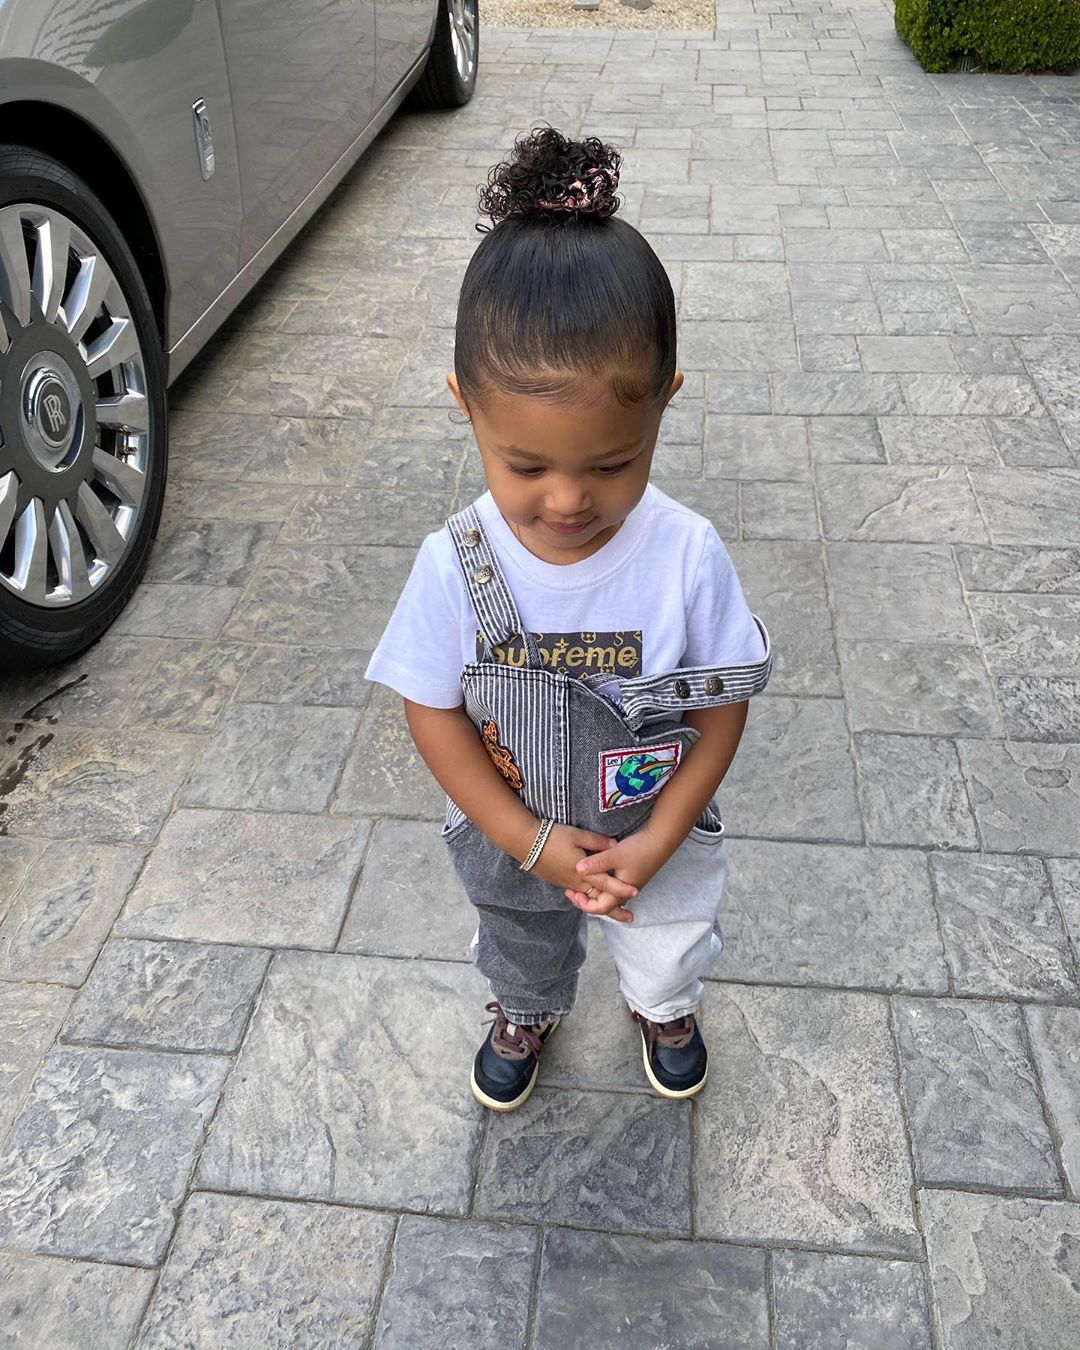 Stormi Webster Photos: See the Cutest Pics of Kylie Jenner's Daughter